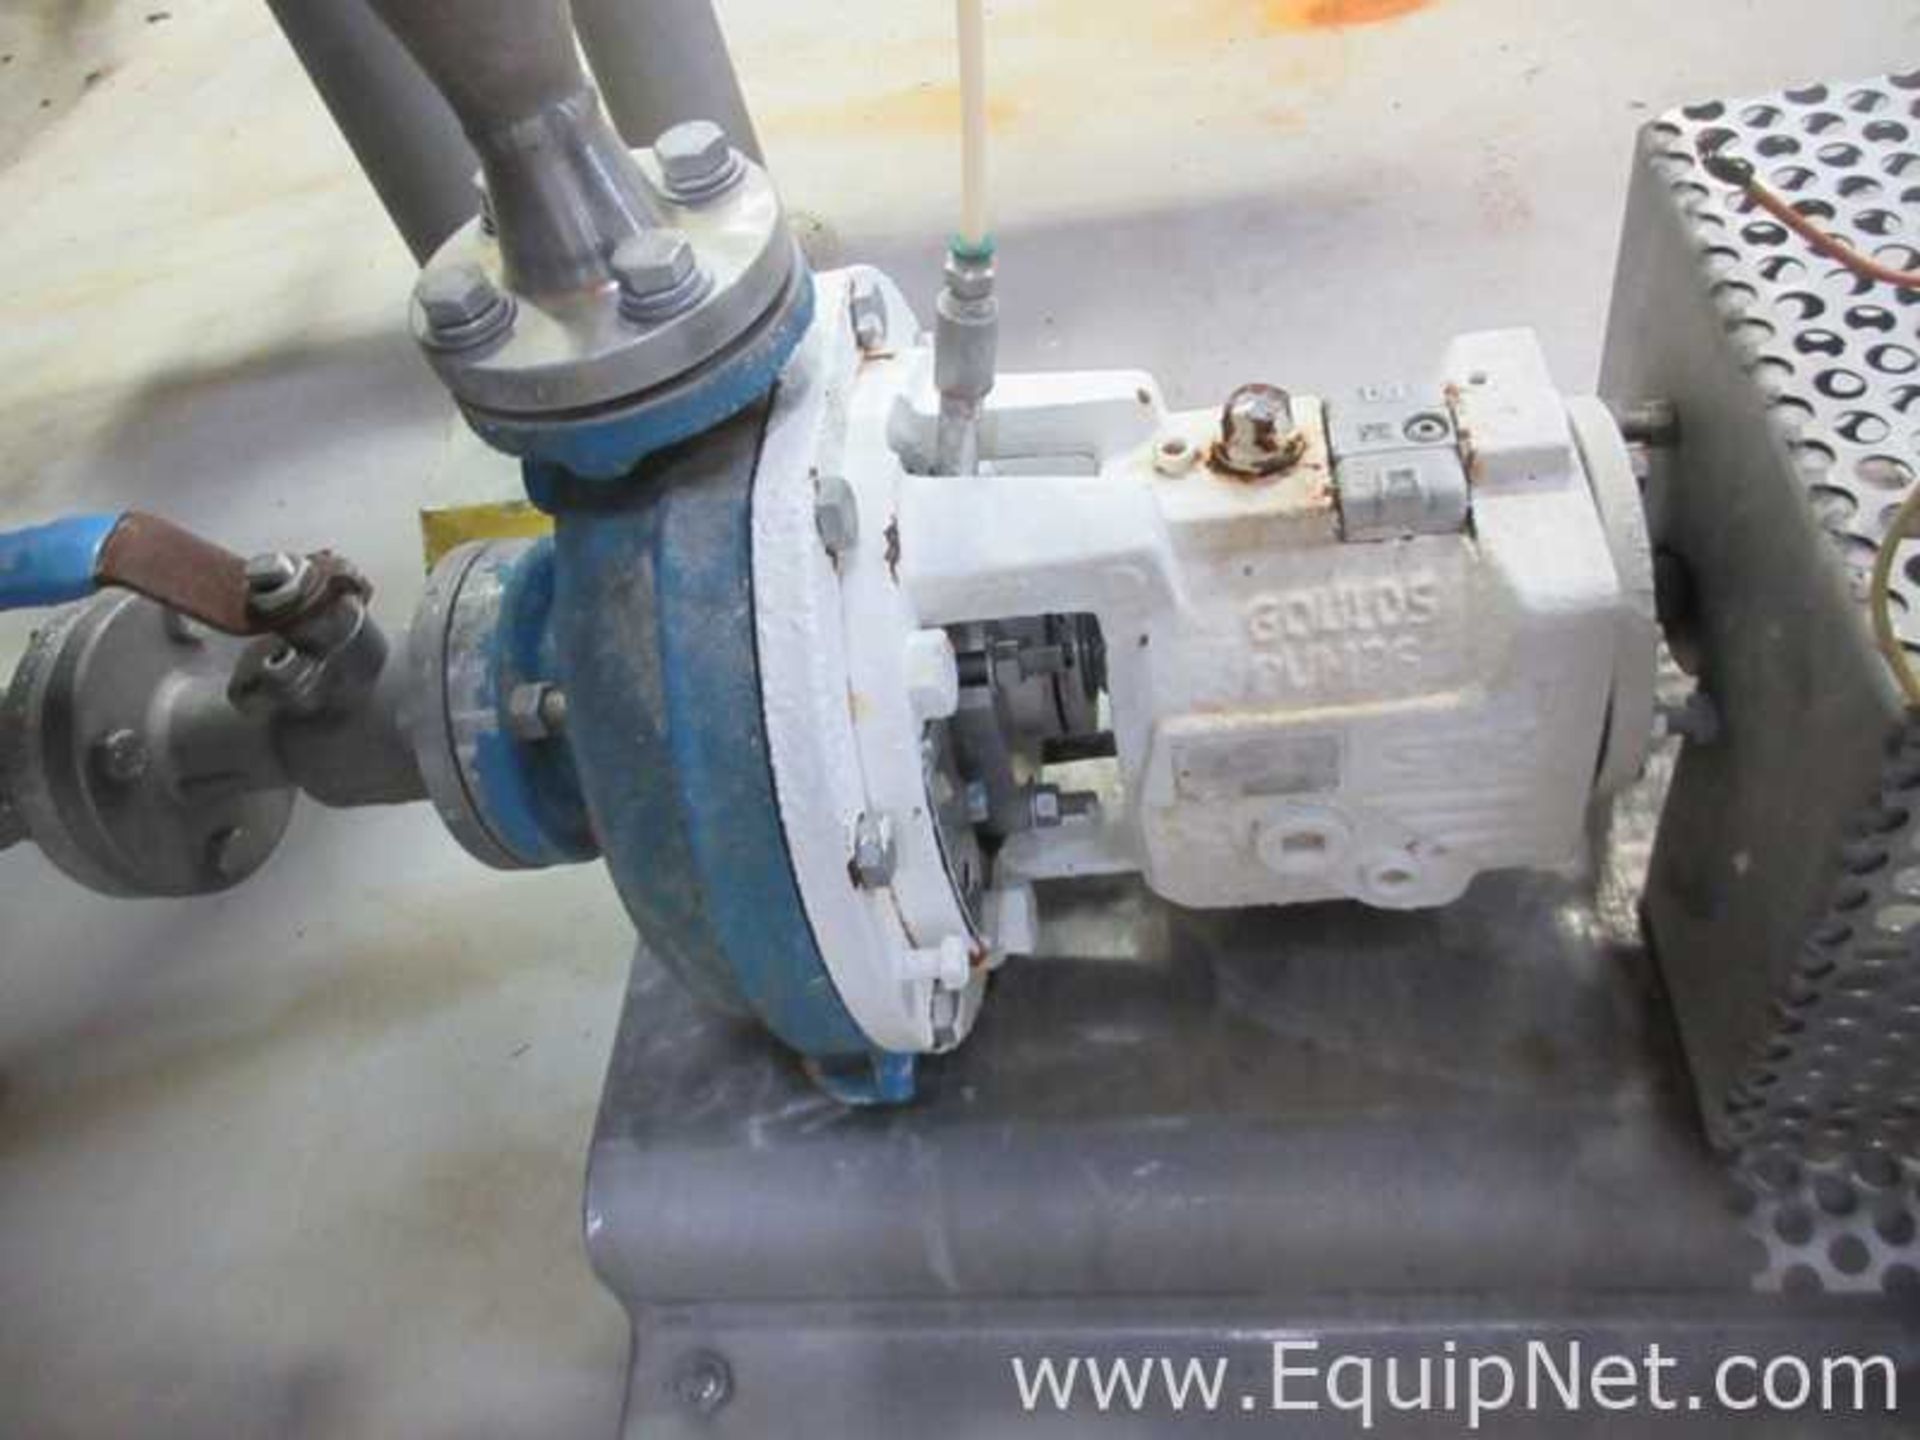 Goulds 3196 Stainless Steel Centrifugal Pump - Image 2 of 5